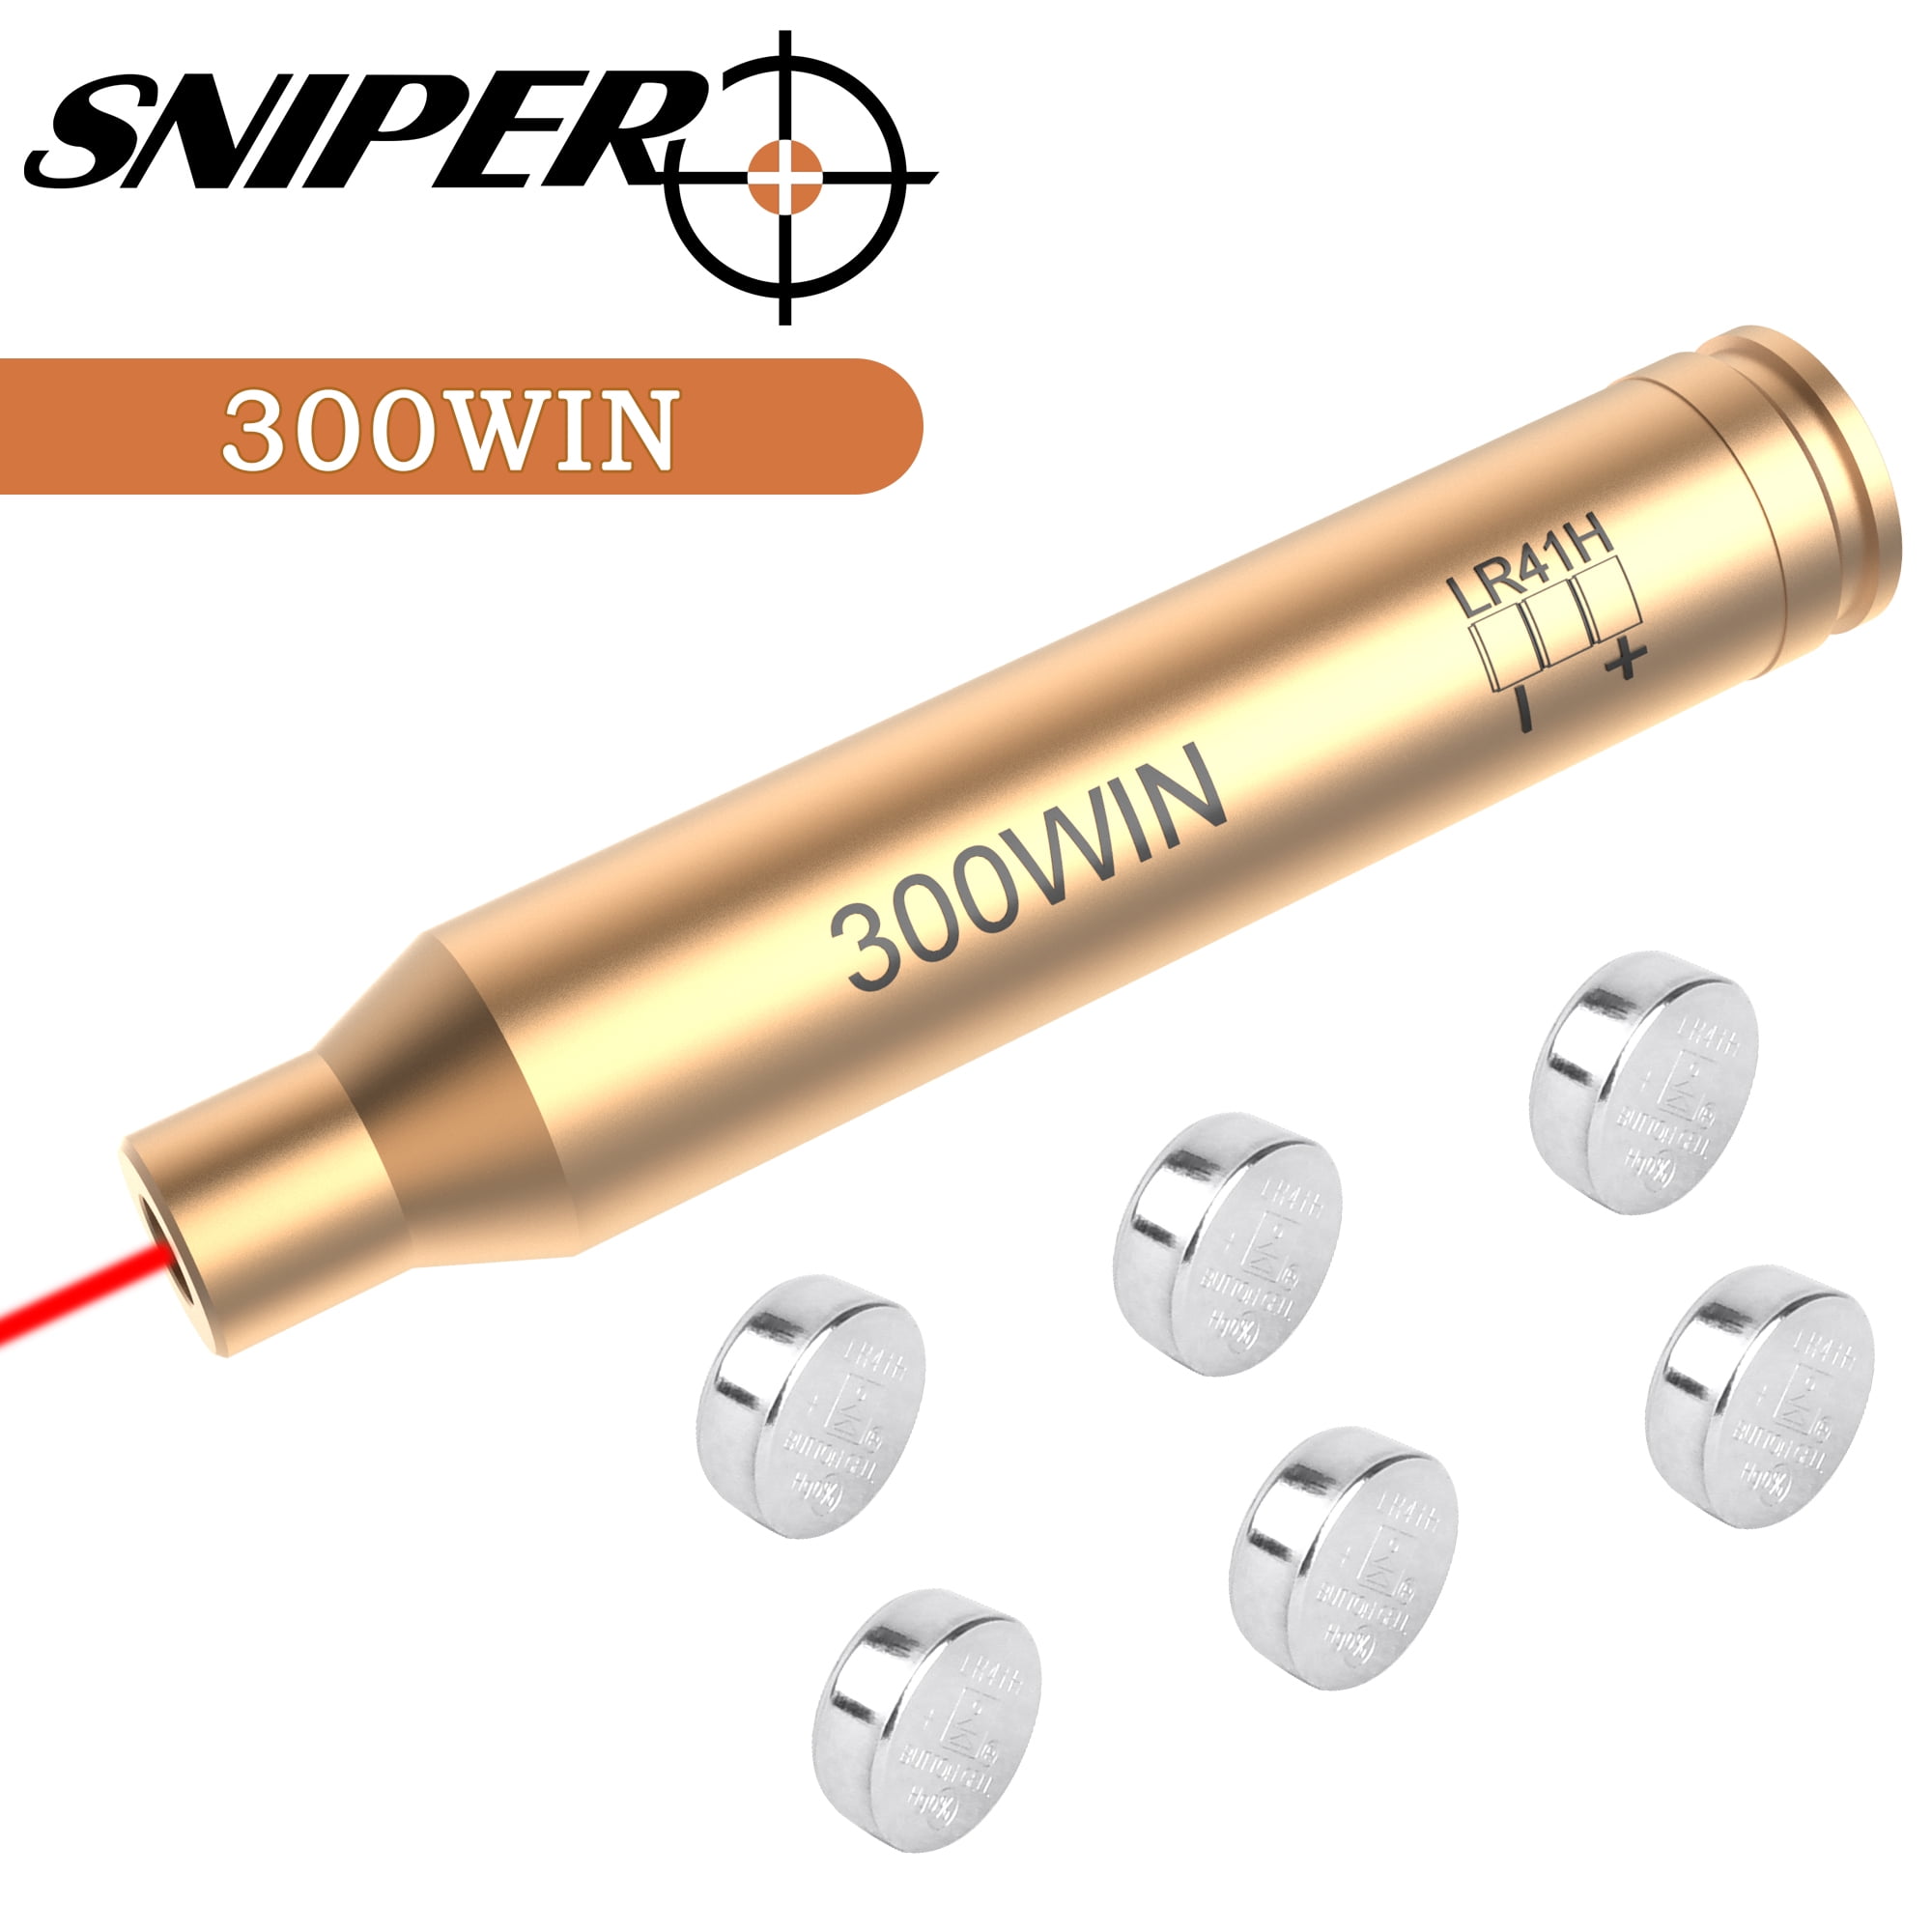 300WIN MAG Red Laser Sight Cartridge Bore Boresighter Caliber for Rifles Hunting 